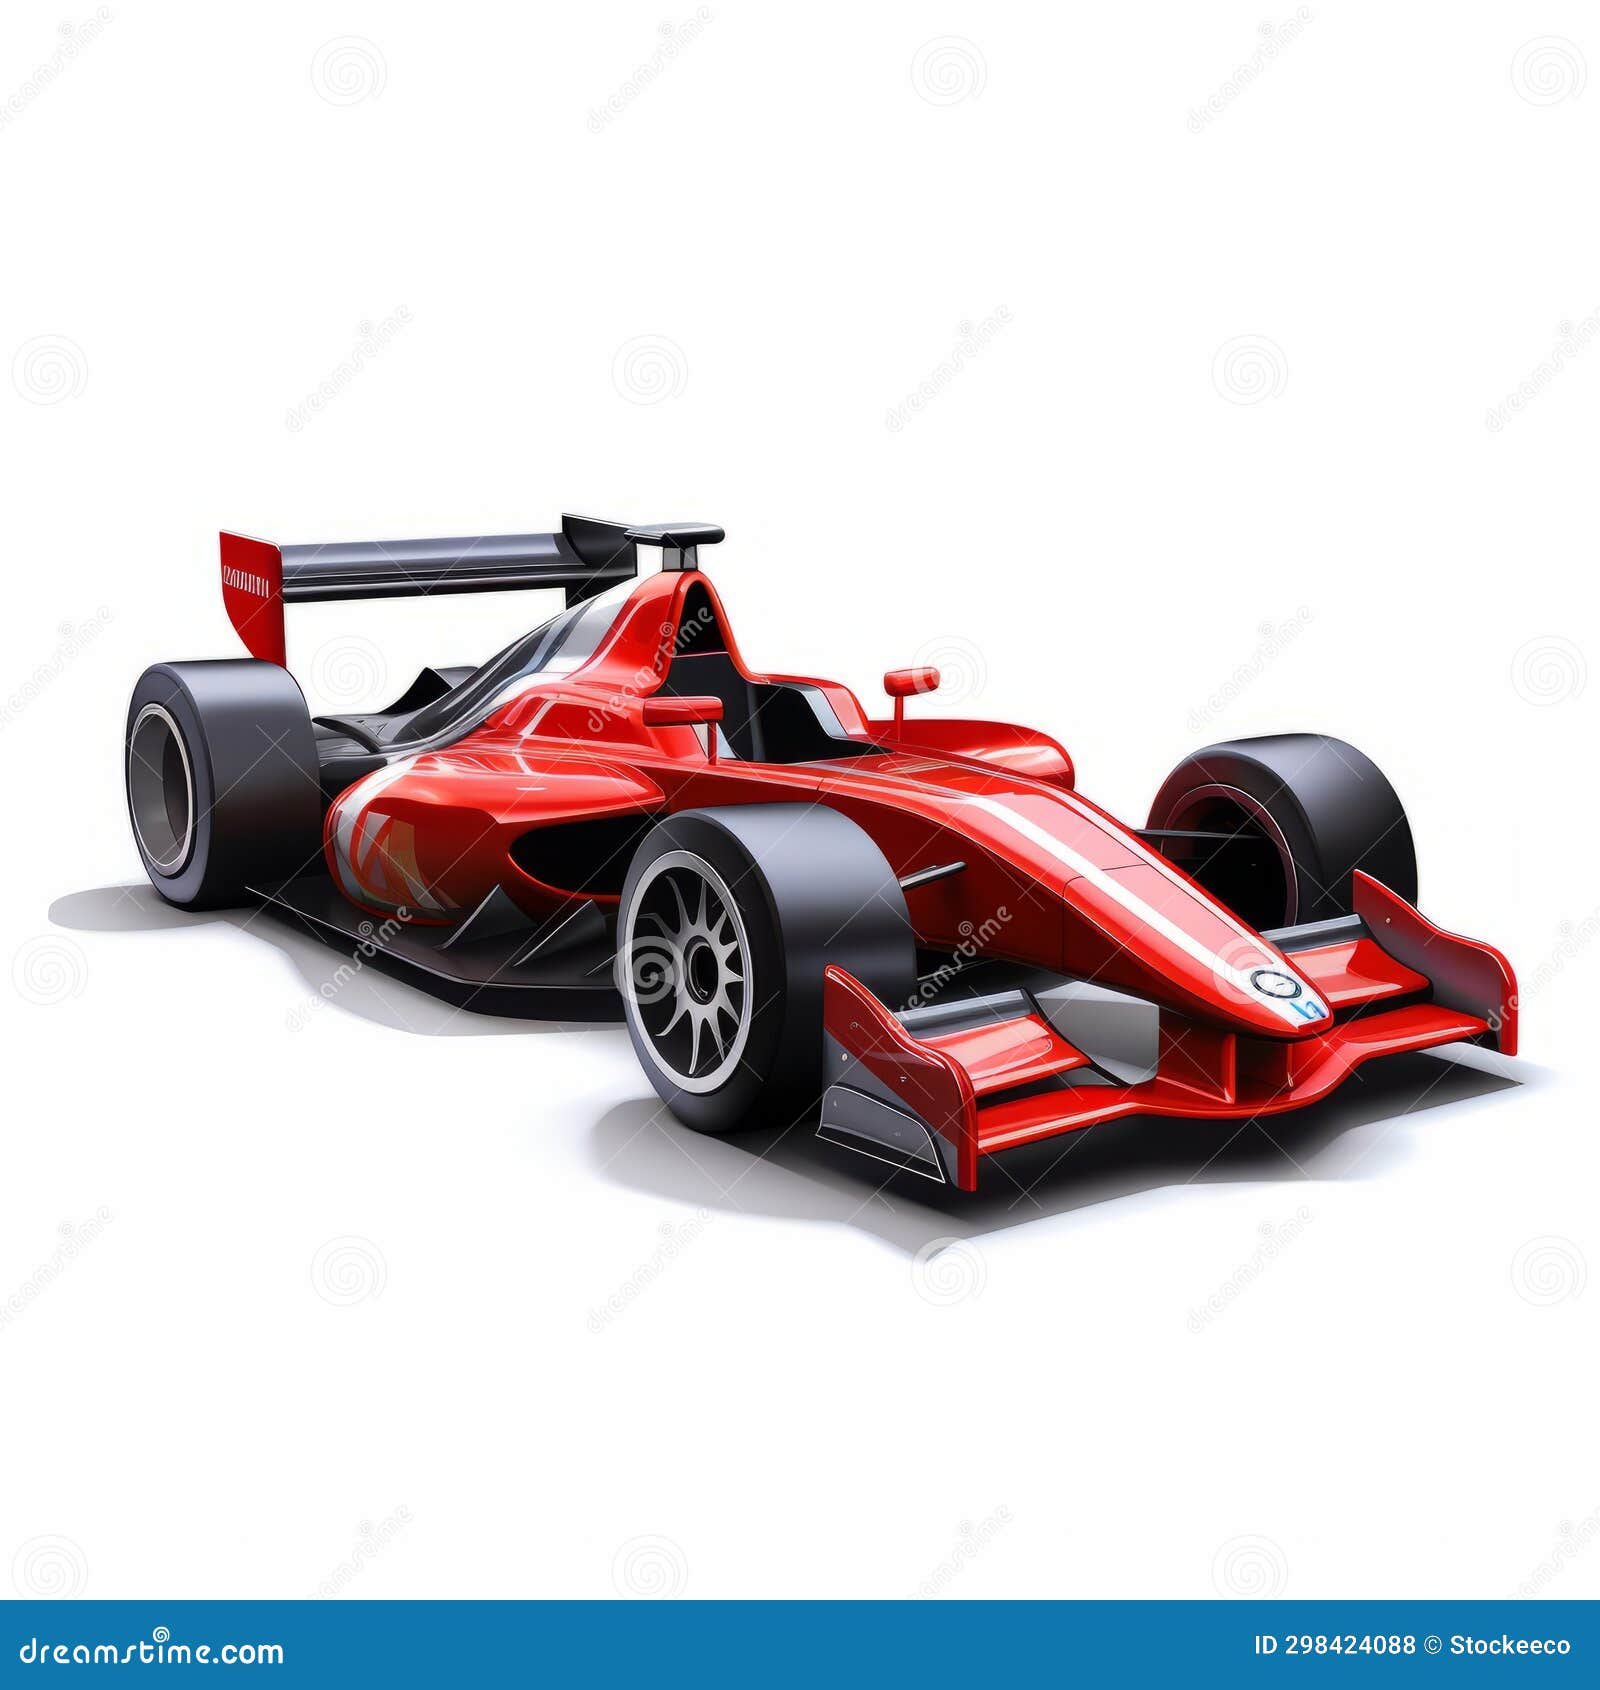 hyperrealistic red race car  with vibrant colors